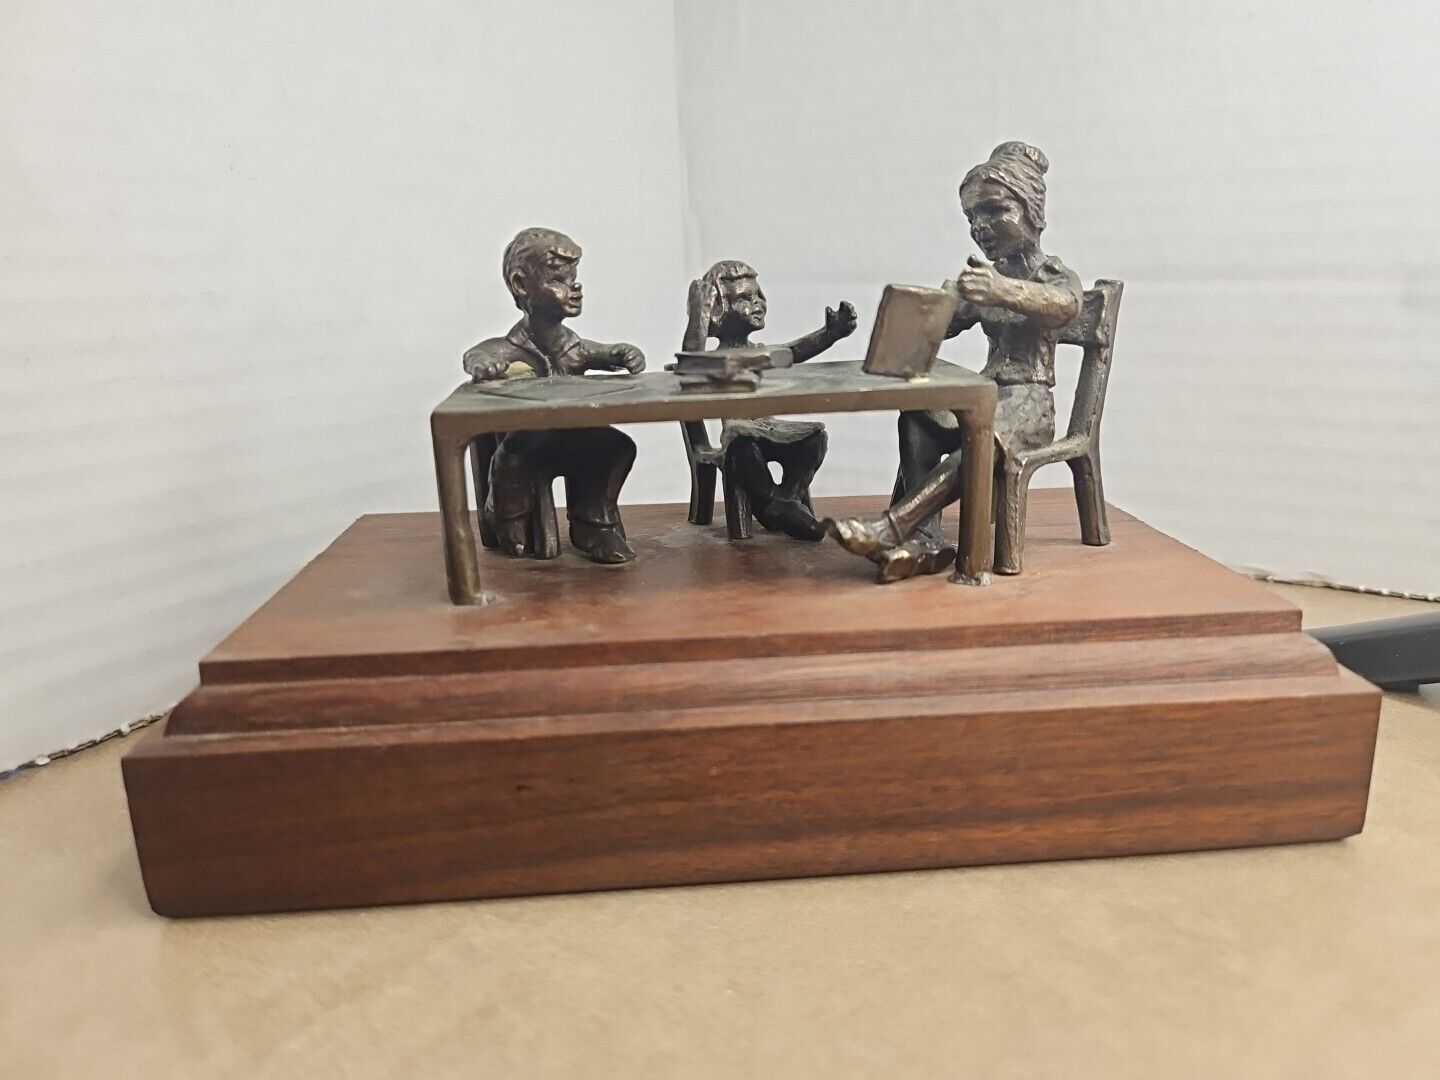 Small Vintage Bronze Sculpture , Teacher At Table With Children , Monted ON Wood